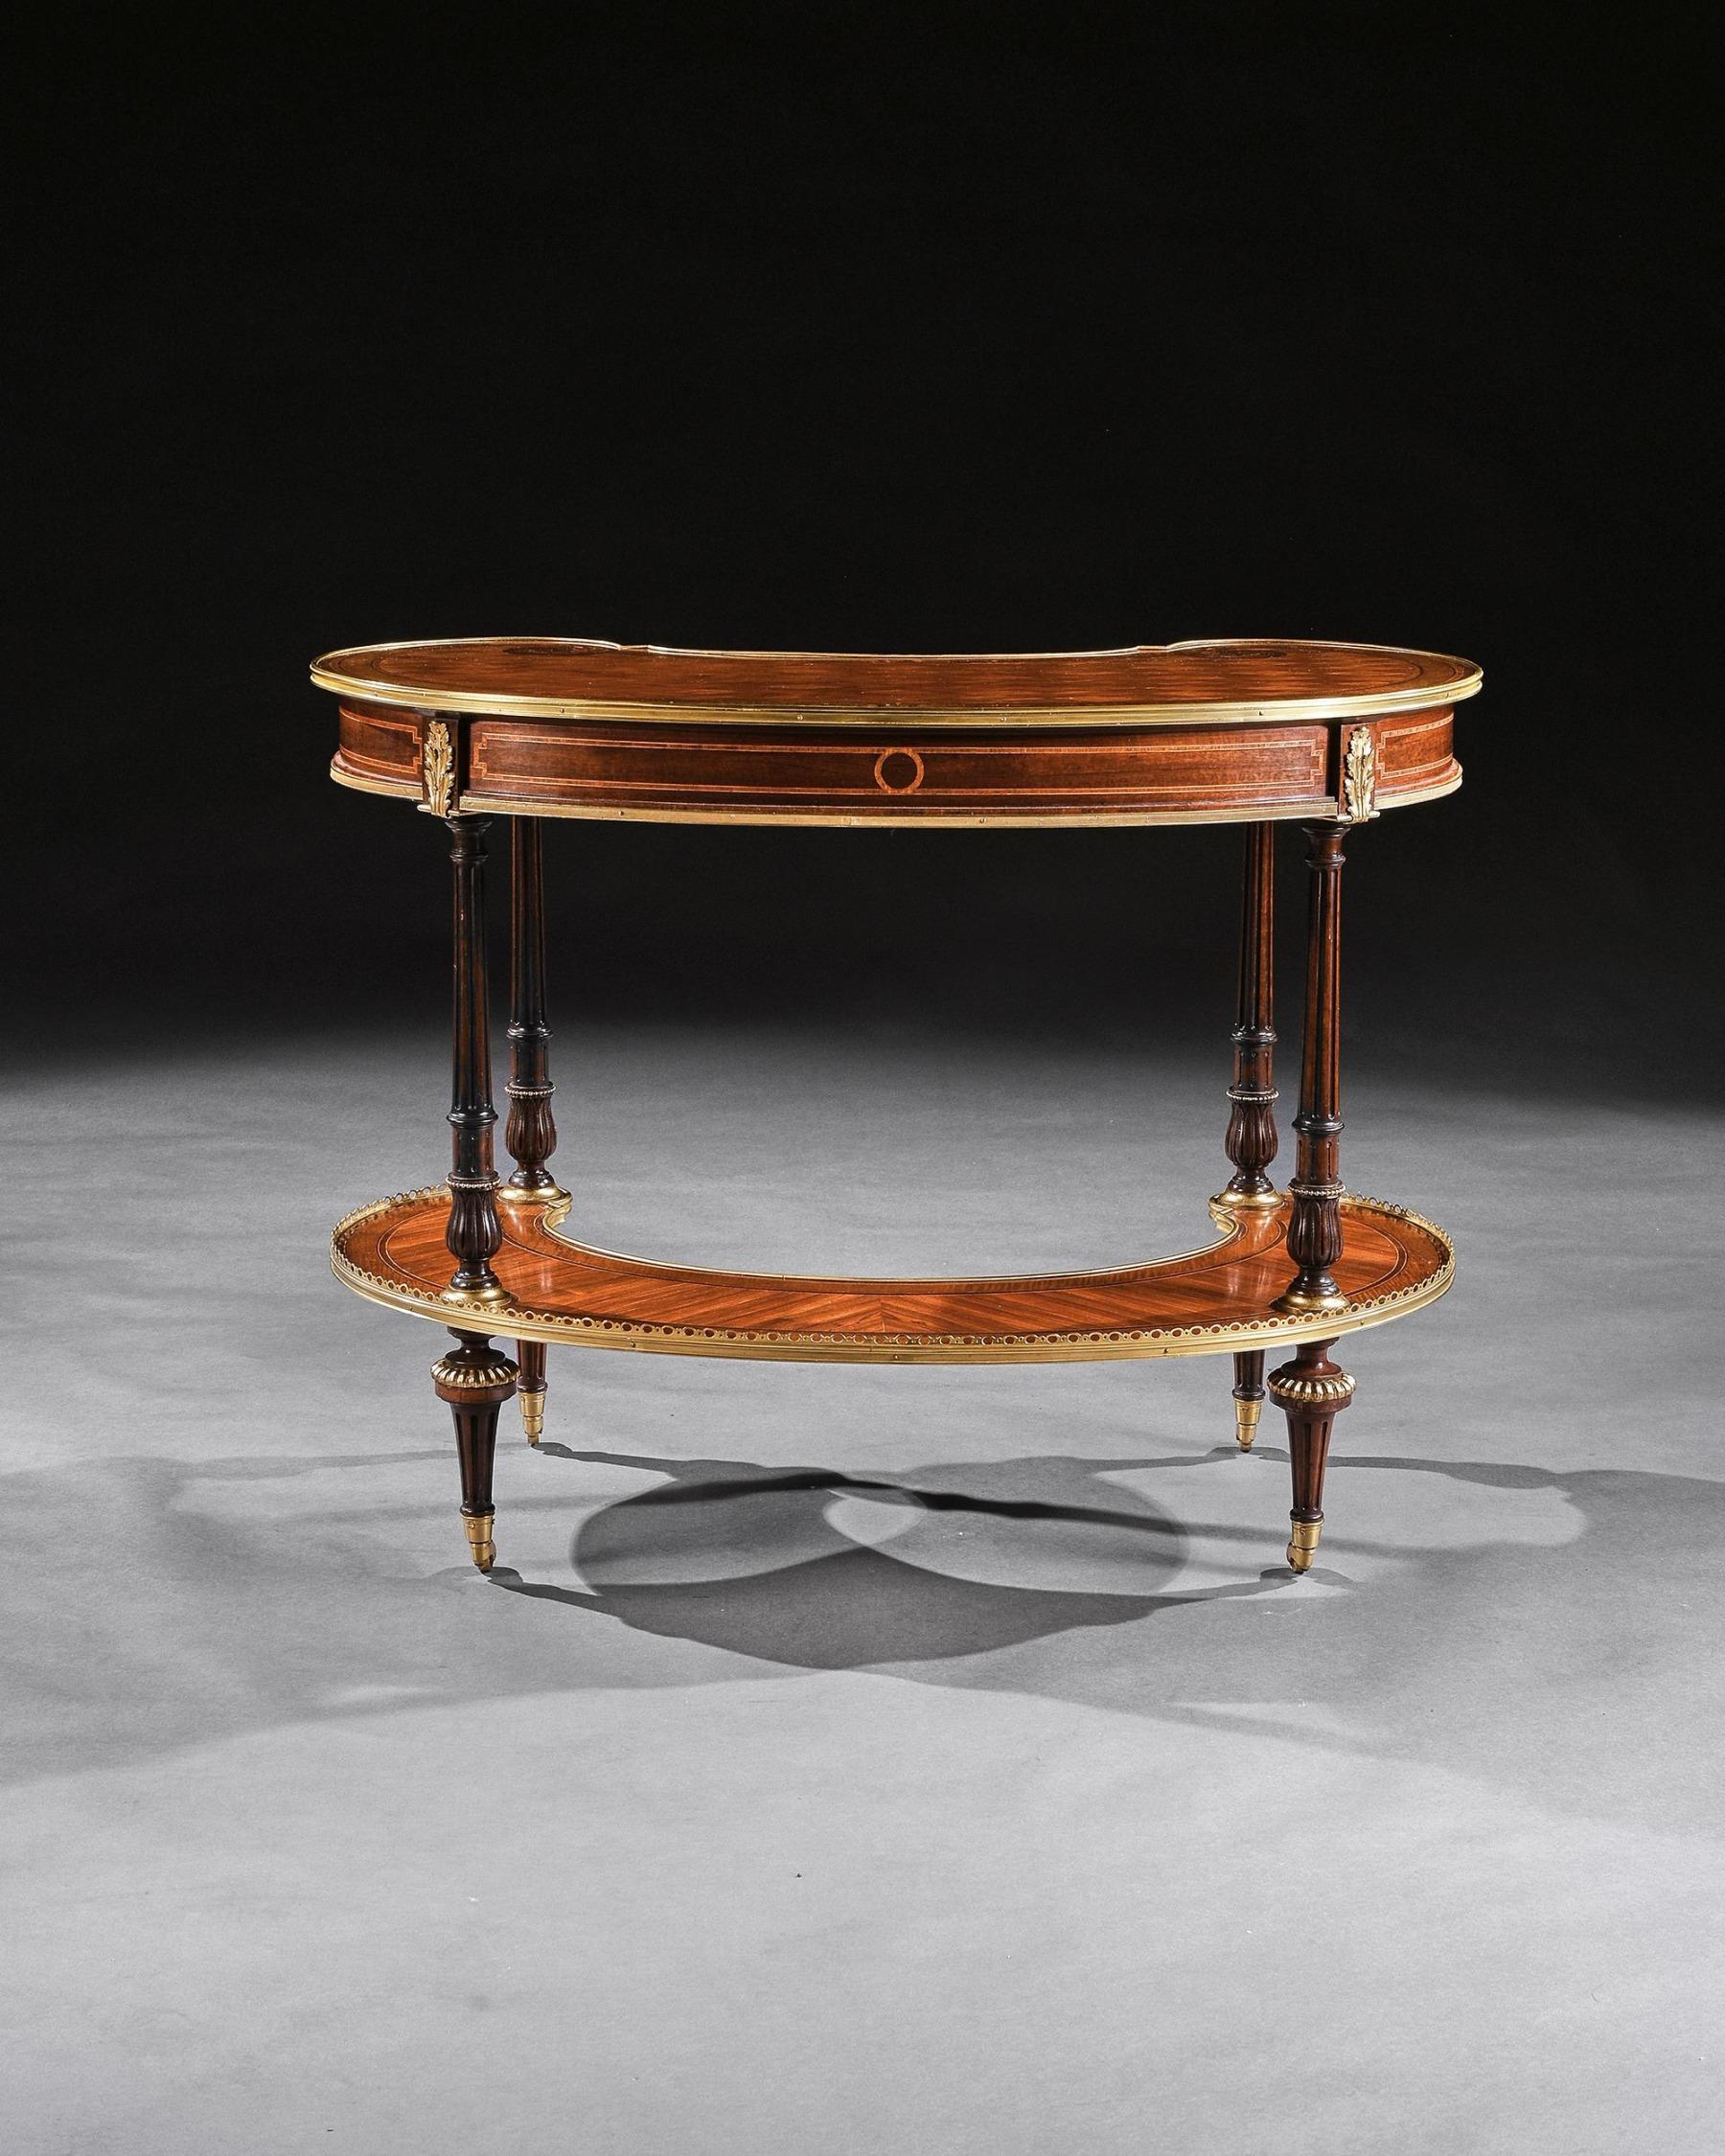 Fine 19th Century Gillows Parquetry and Gilt Bronze Kidney Shaped Table In Good Condition For Sale In Benington, Herts